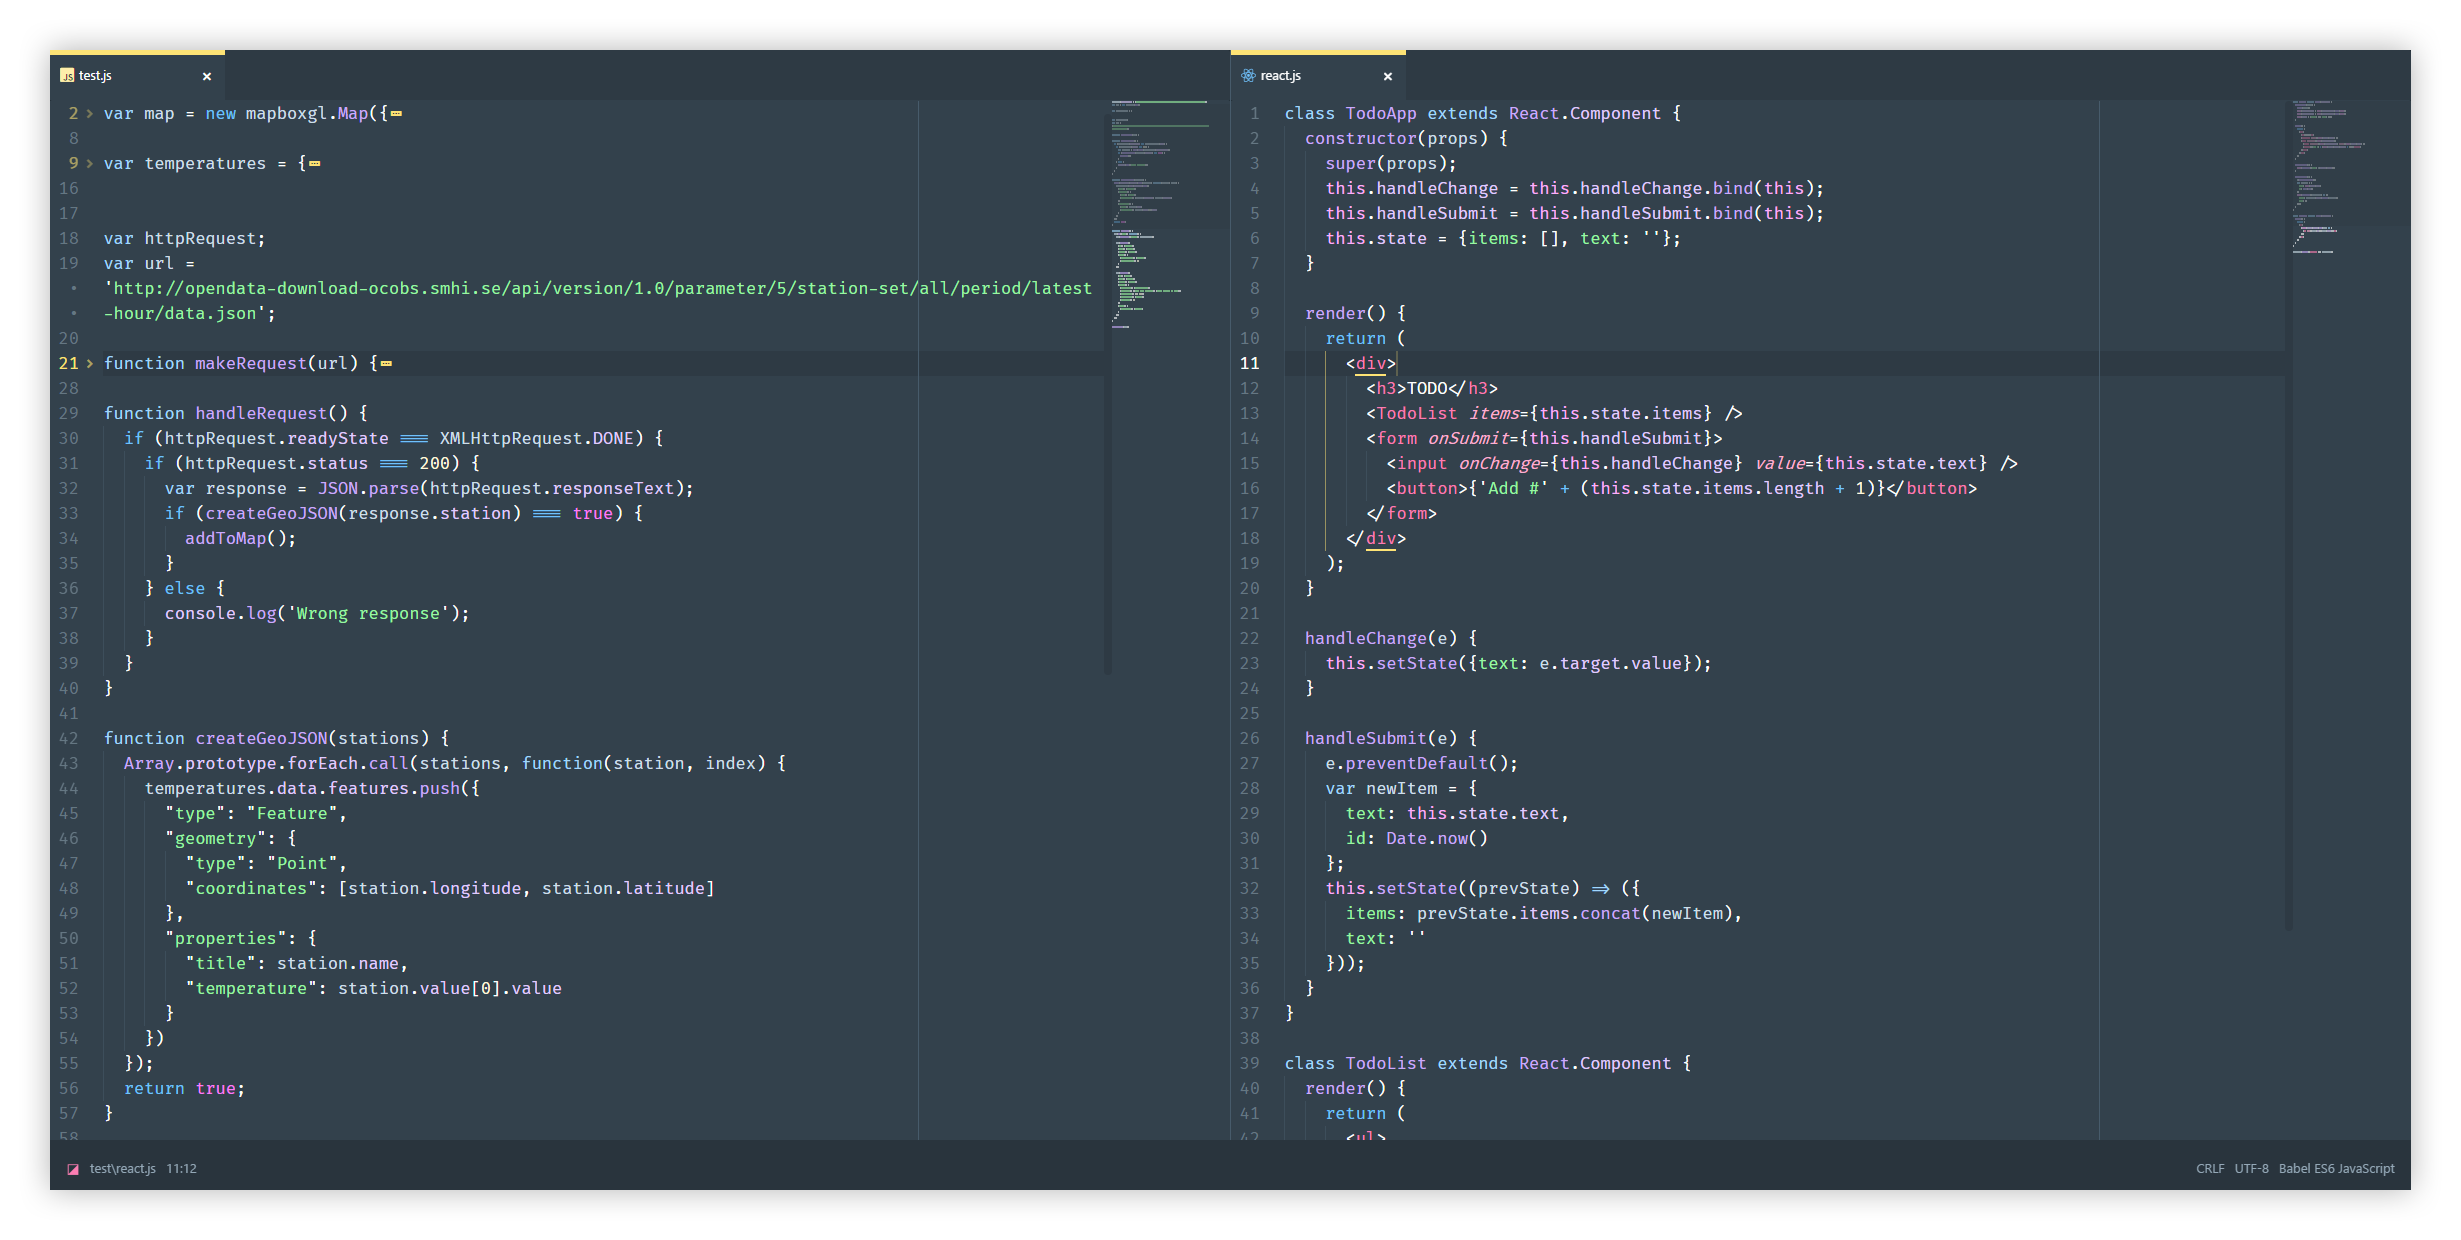 Screenshot of Atom showing scripts in different formats.